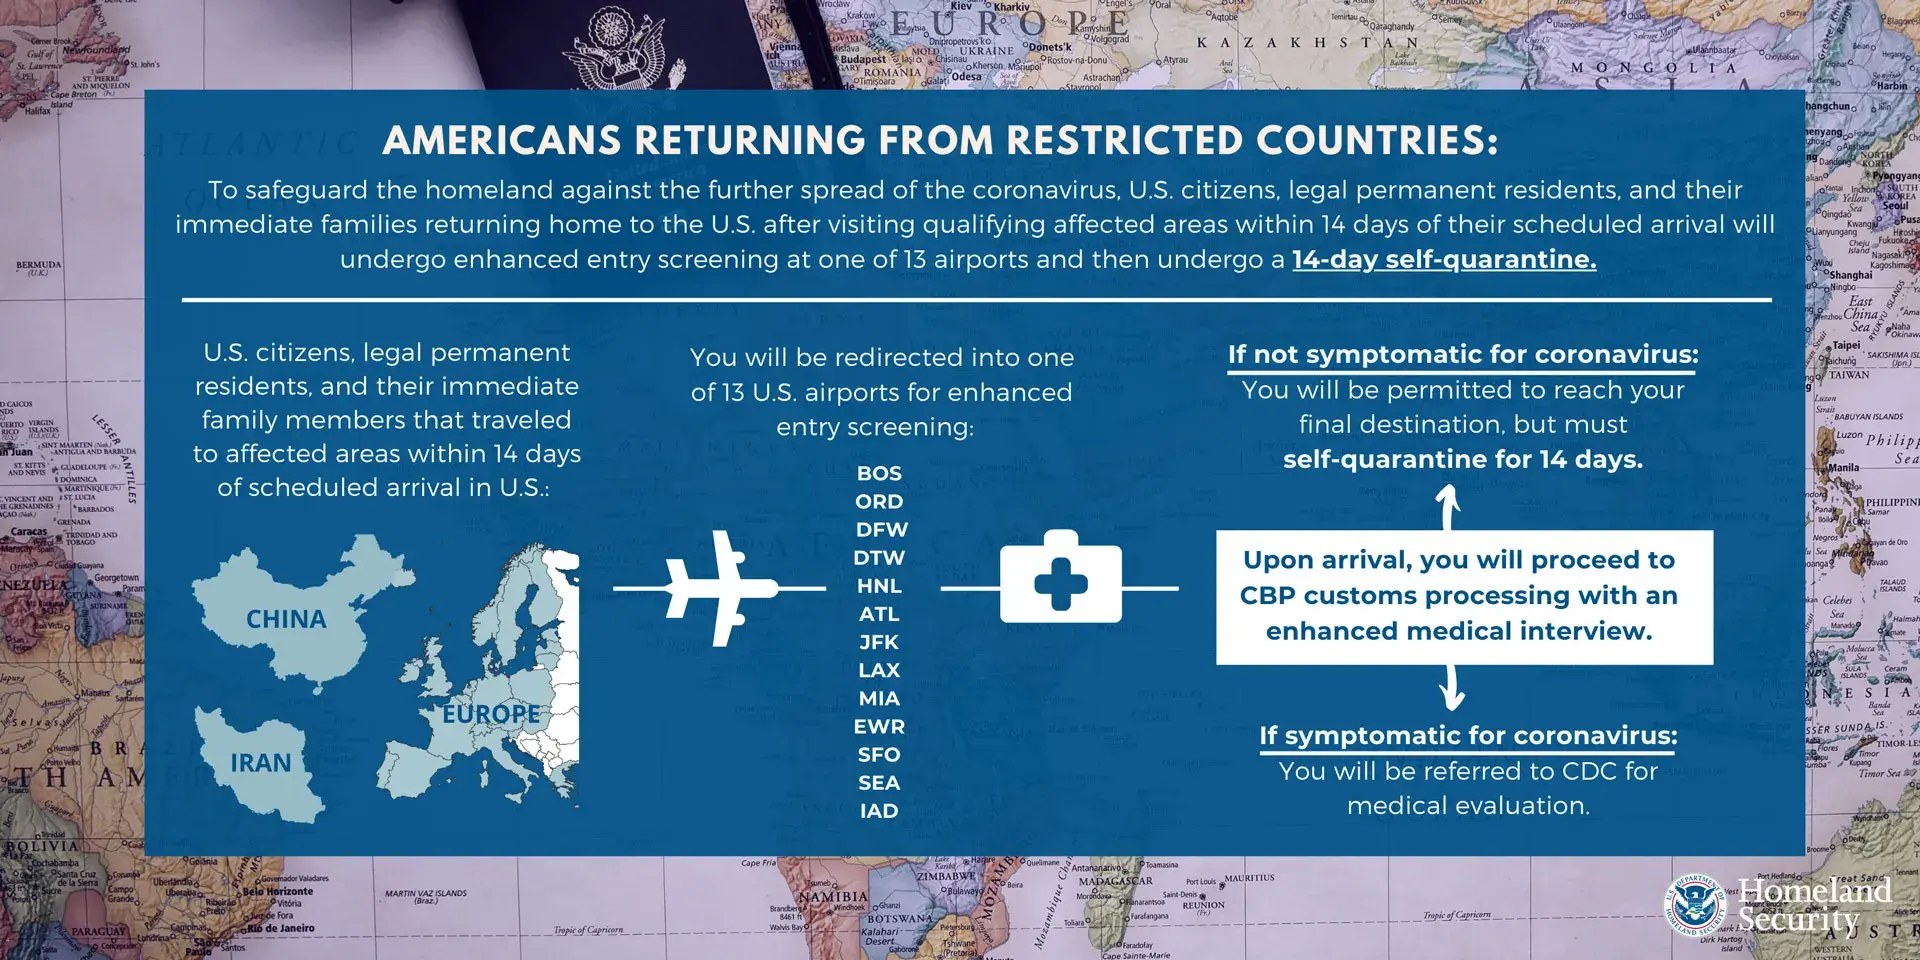 Americans Returning From Restricted Countries: To safeguard the homeland against the further spread of the coronavirus, US citizens, legal permanent residents, and their immediate families returning home to the US after visiting qualifying affected areas with 14 days of their scheduled arrival will undergo enhanced entry screening at one of 13 airports and then undergo a 14-day self-quarantine. | US citizens, legal permanent residents, and their immediate family members that traveled to affected ares within 14 days of scheduled arrival in the US [map of China, Iran, and Europe] You will be redirected into one of 13 US airports for enhanced entry screening: BOS, ORD, DFW, DTW, HNL, ATL, JFK, LAX, MIA, EWR, SFO, SEA, IAD. | Upon arrival, you will proceed with CBP customs process with an enhanced medial interview. If not symptomatic for coronavirus, You will be permitted to reach your final destination, but must self-quarantine for 14 days. If symptomatic for coronavirus, you will be referred to CDC for medical evaluation.